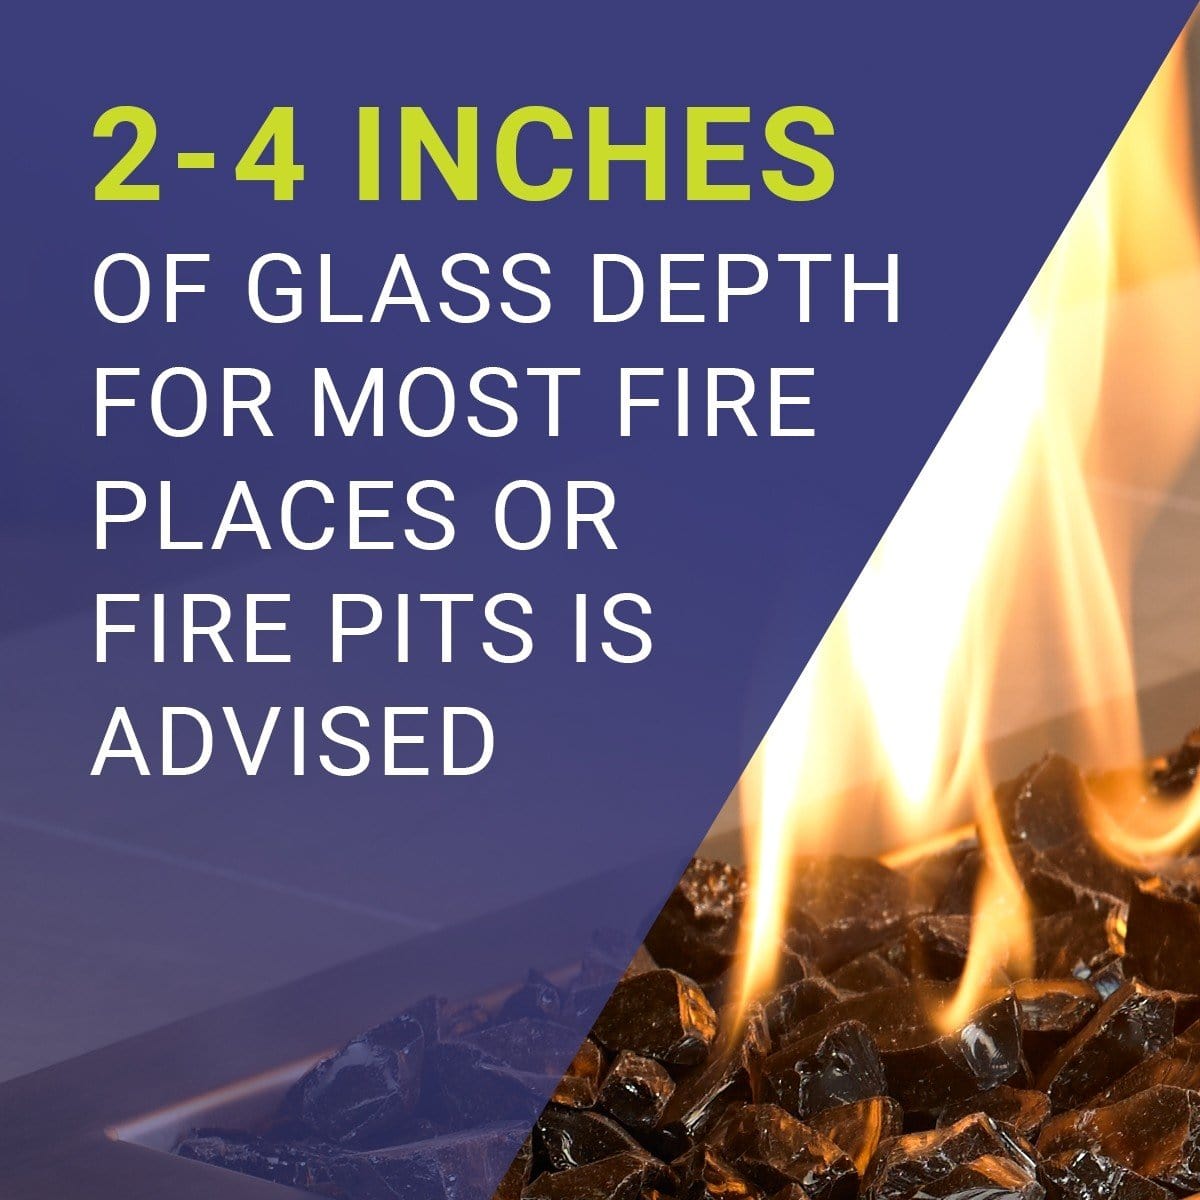 American Fire Glass AFF-GDRF-10 1/4-Inch Premium Fire Glass 10-Pounds, Gold Reflective